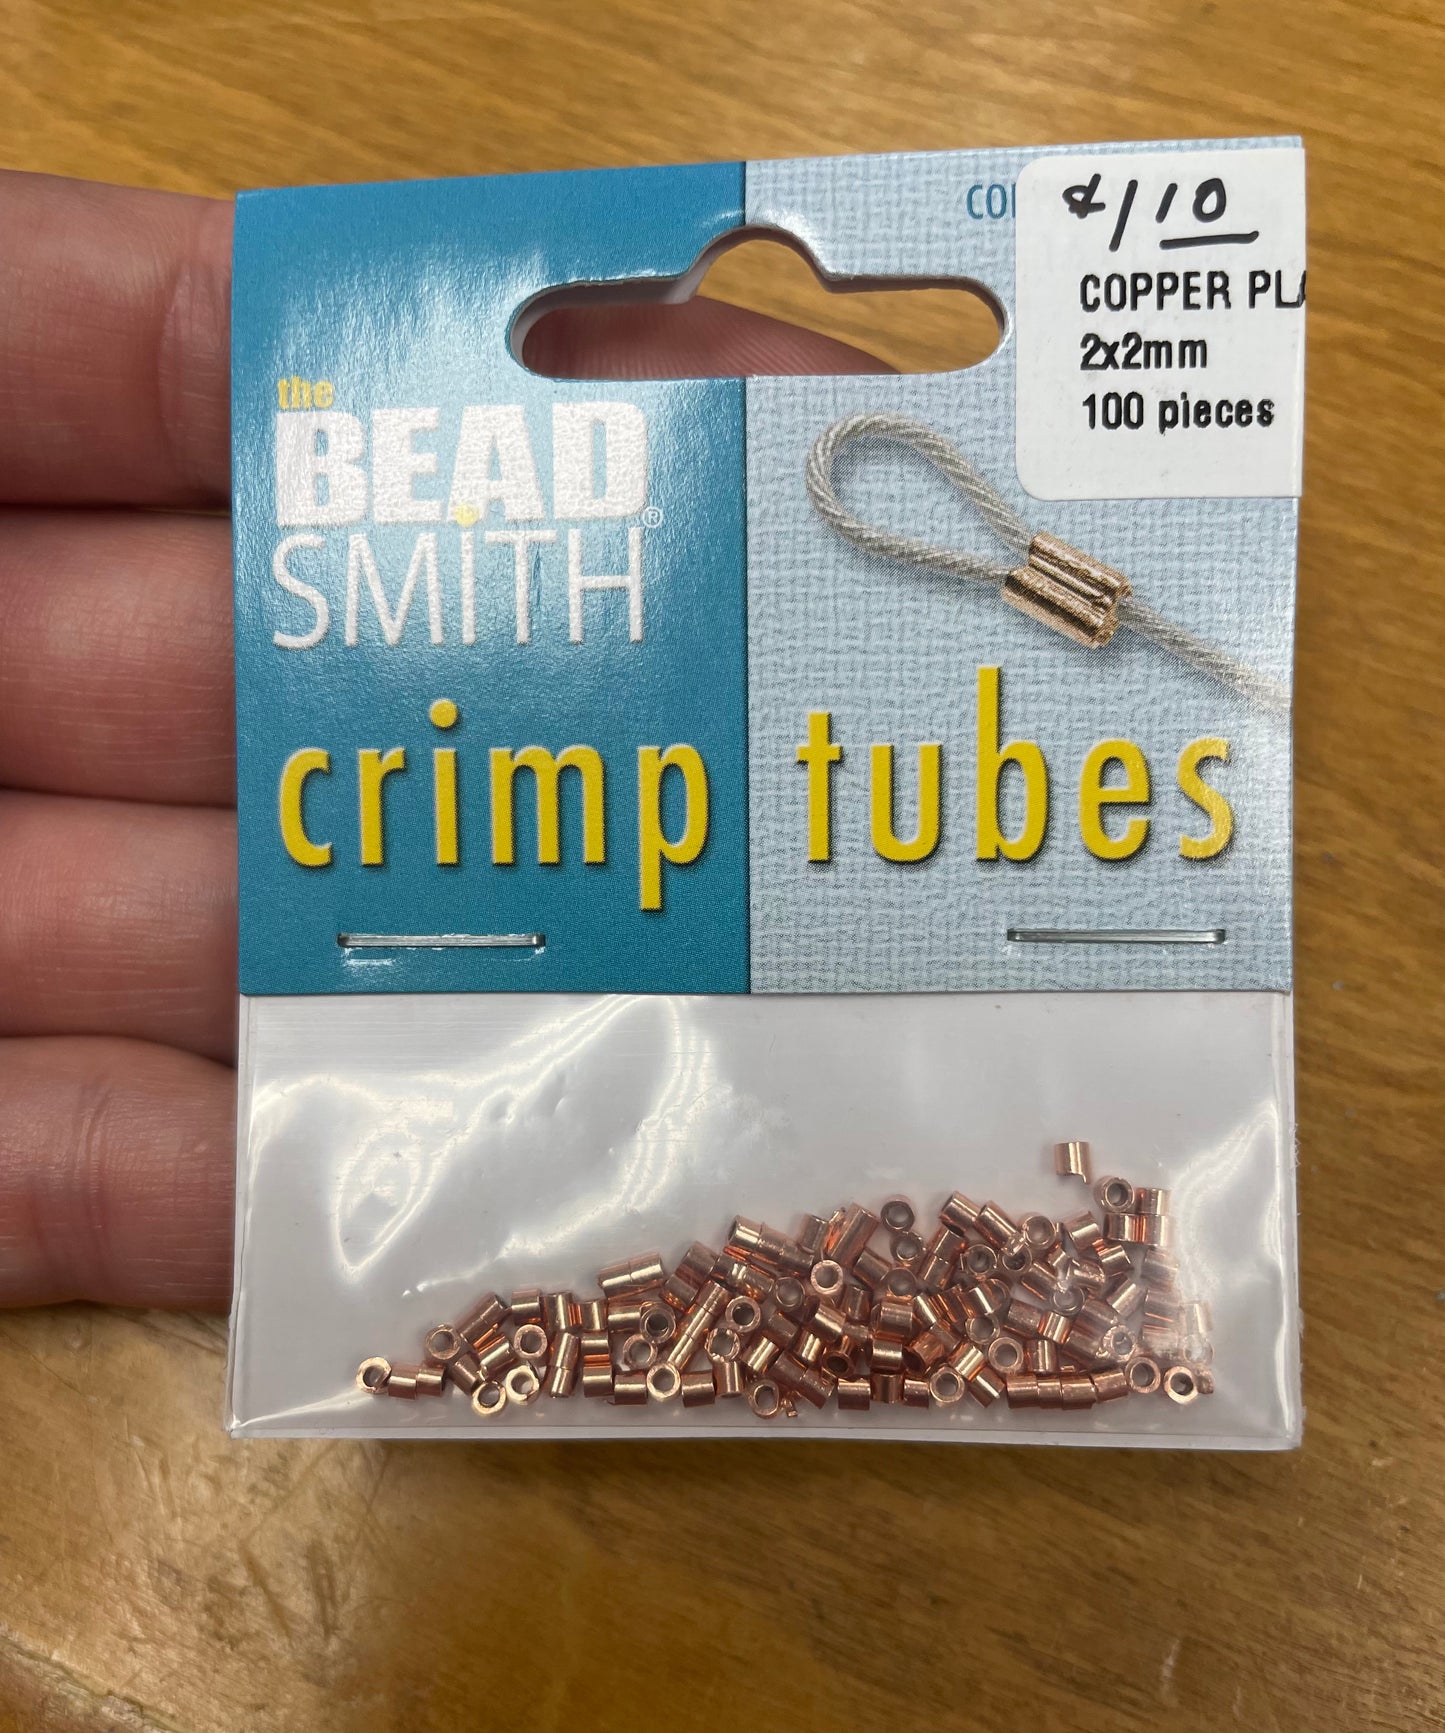 BeadSmith Crimp Tubes Copper Plated 2X2MM